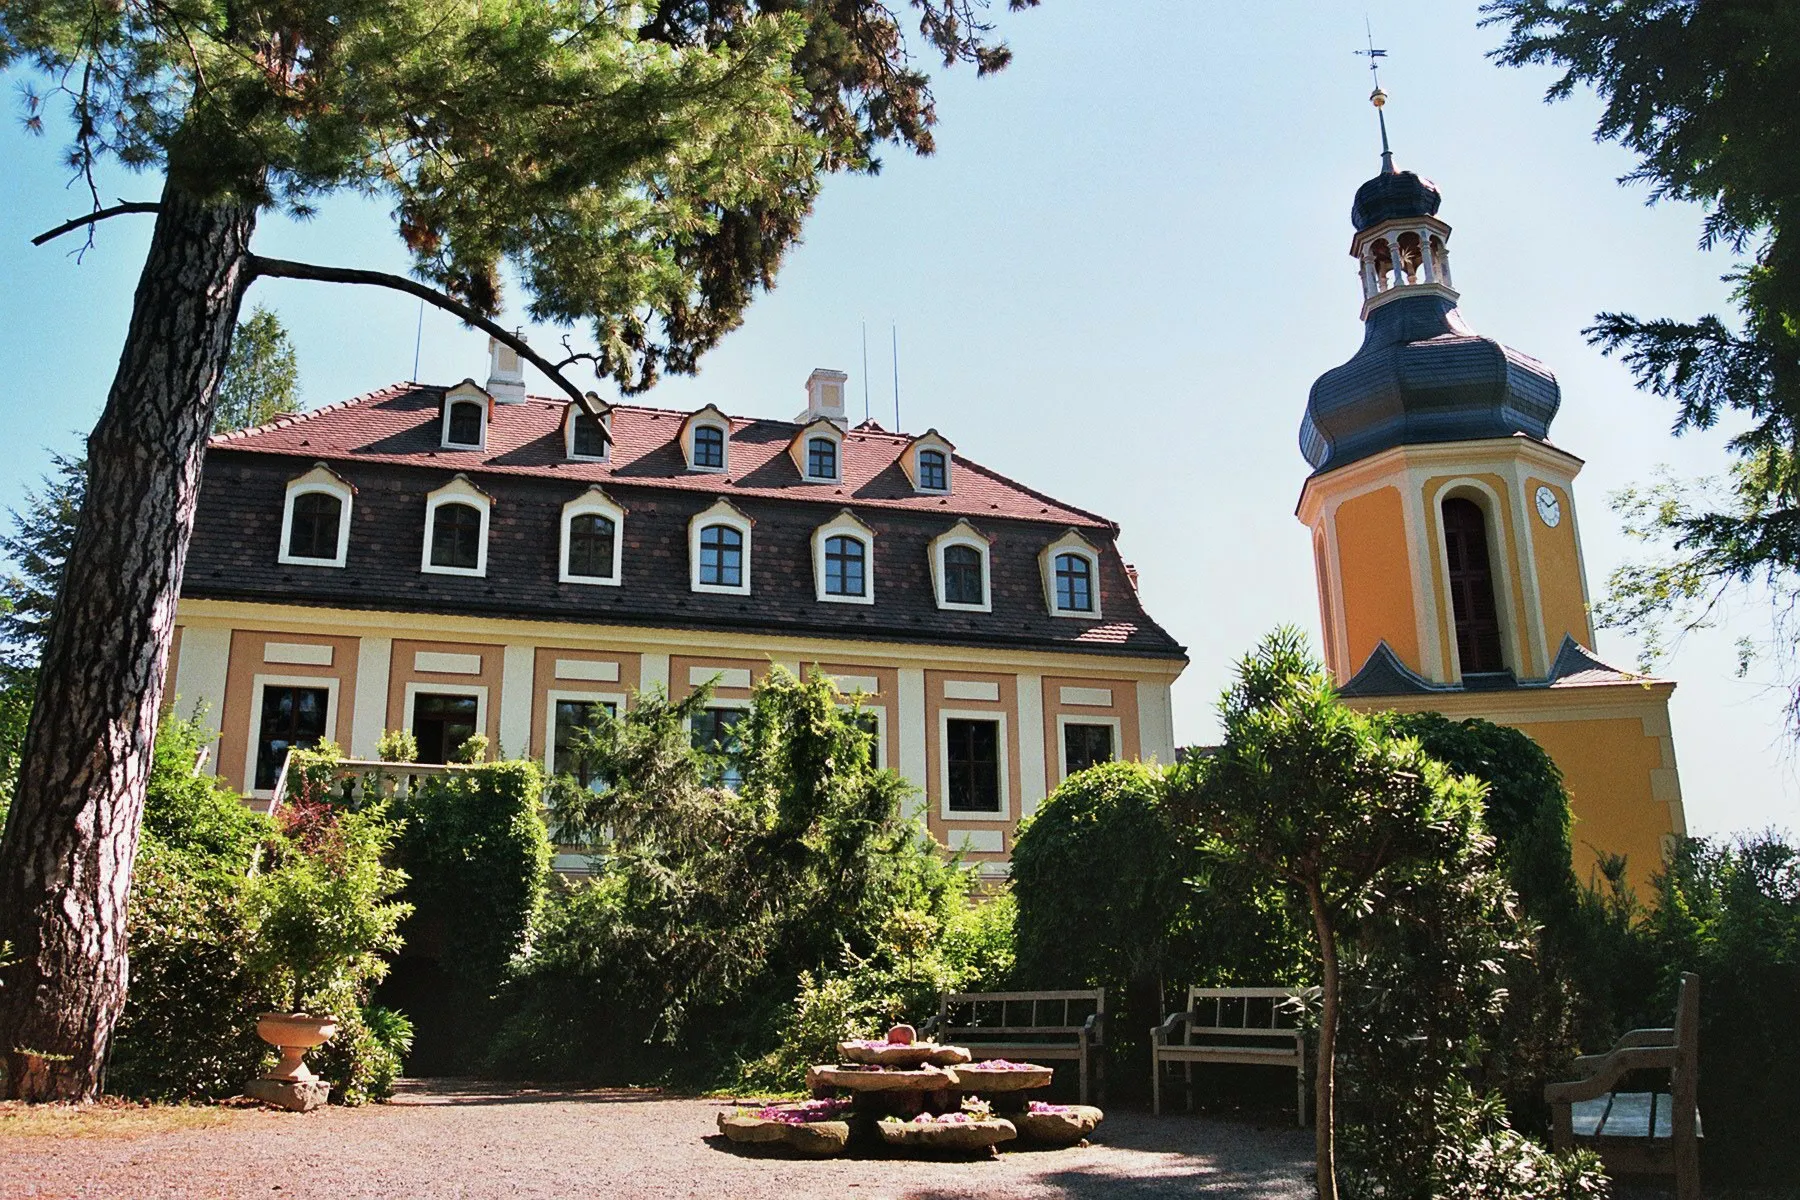 Photo showing: This image shows Zuschendorf castle in Pirna in Saxony, Germany.